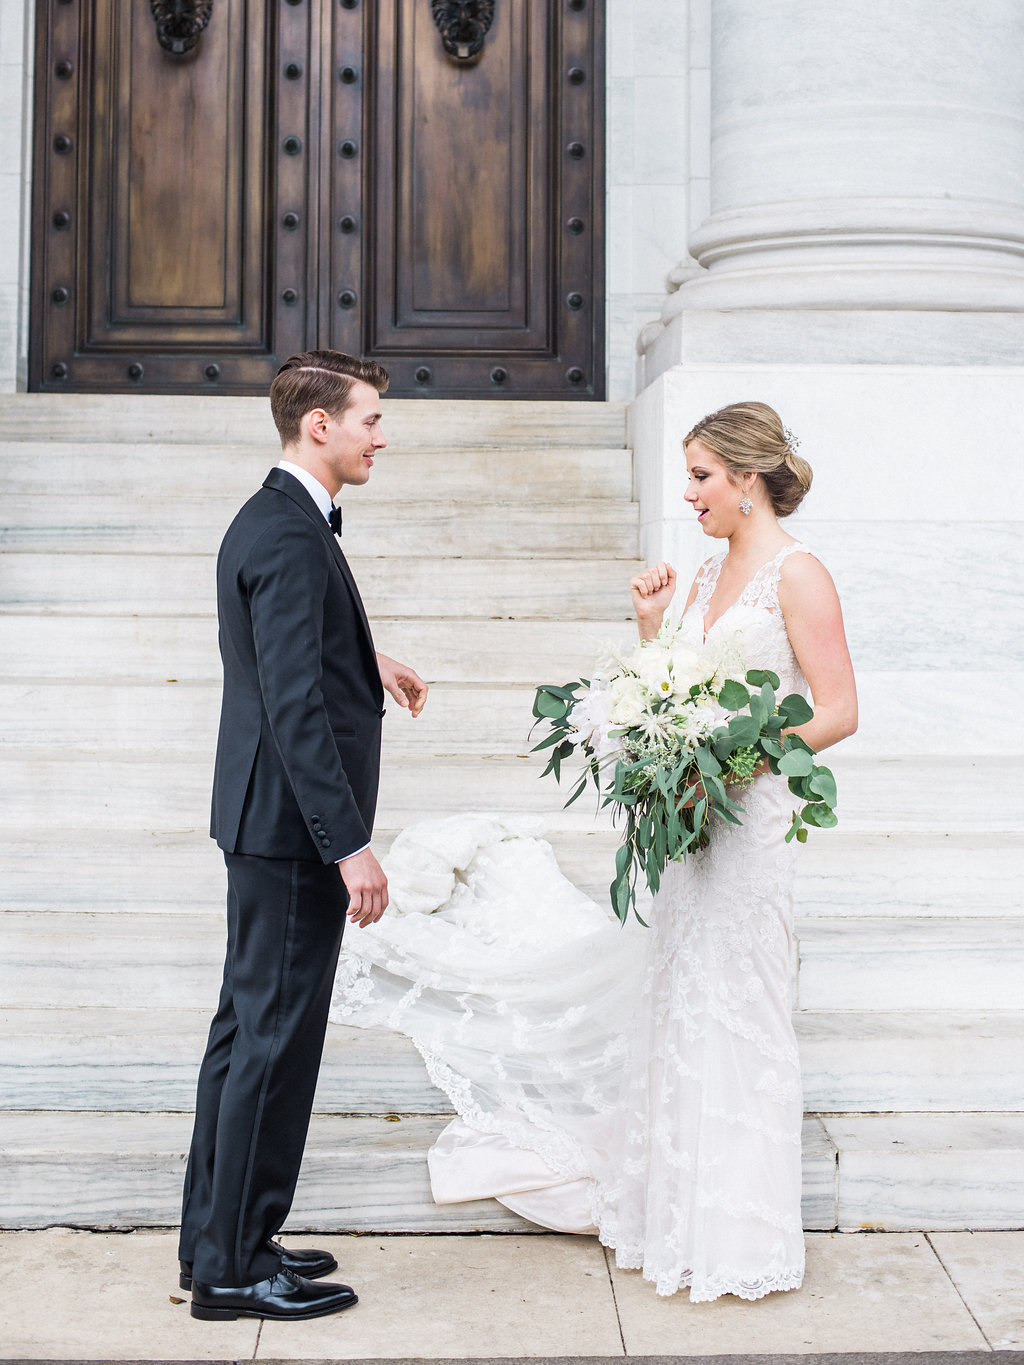 Copper and White DC Wedding at DAR. DC Wedding Planner Bright Occasions. Photo by Lissa Ryan Photography